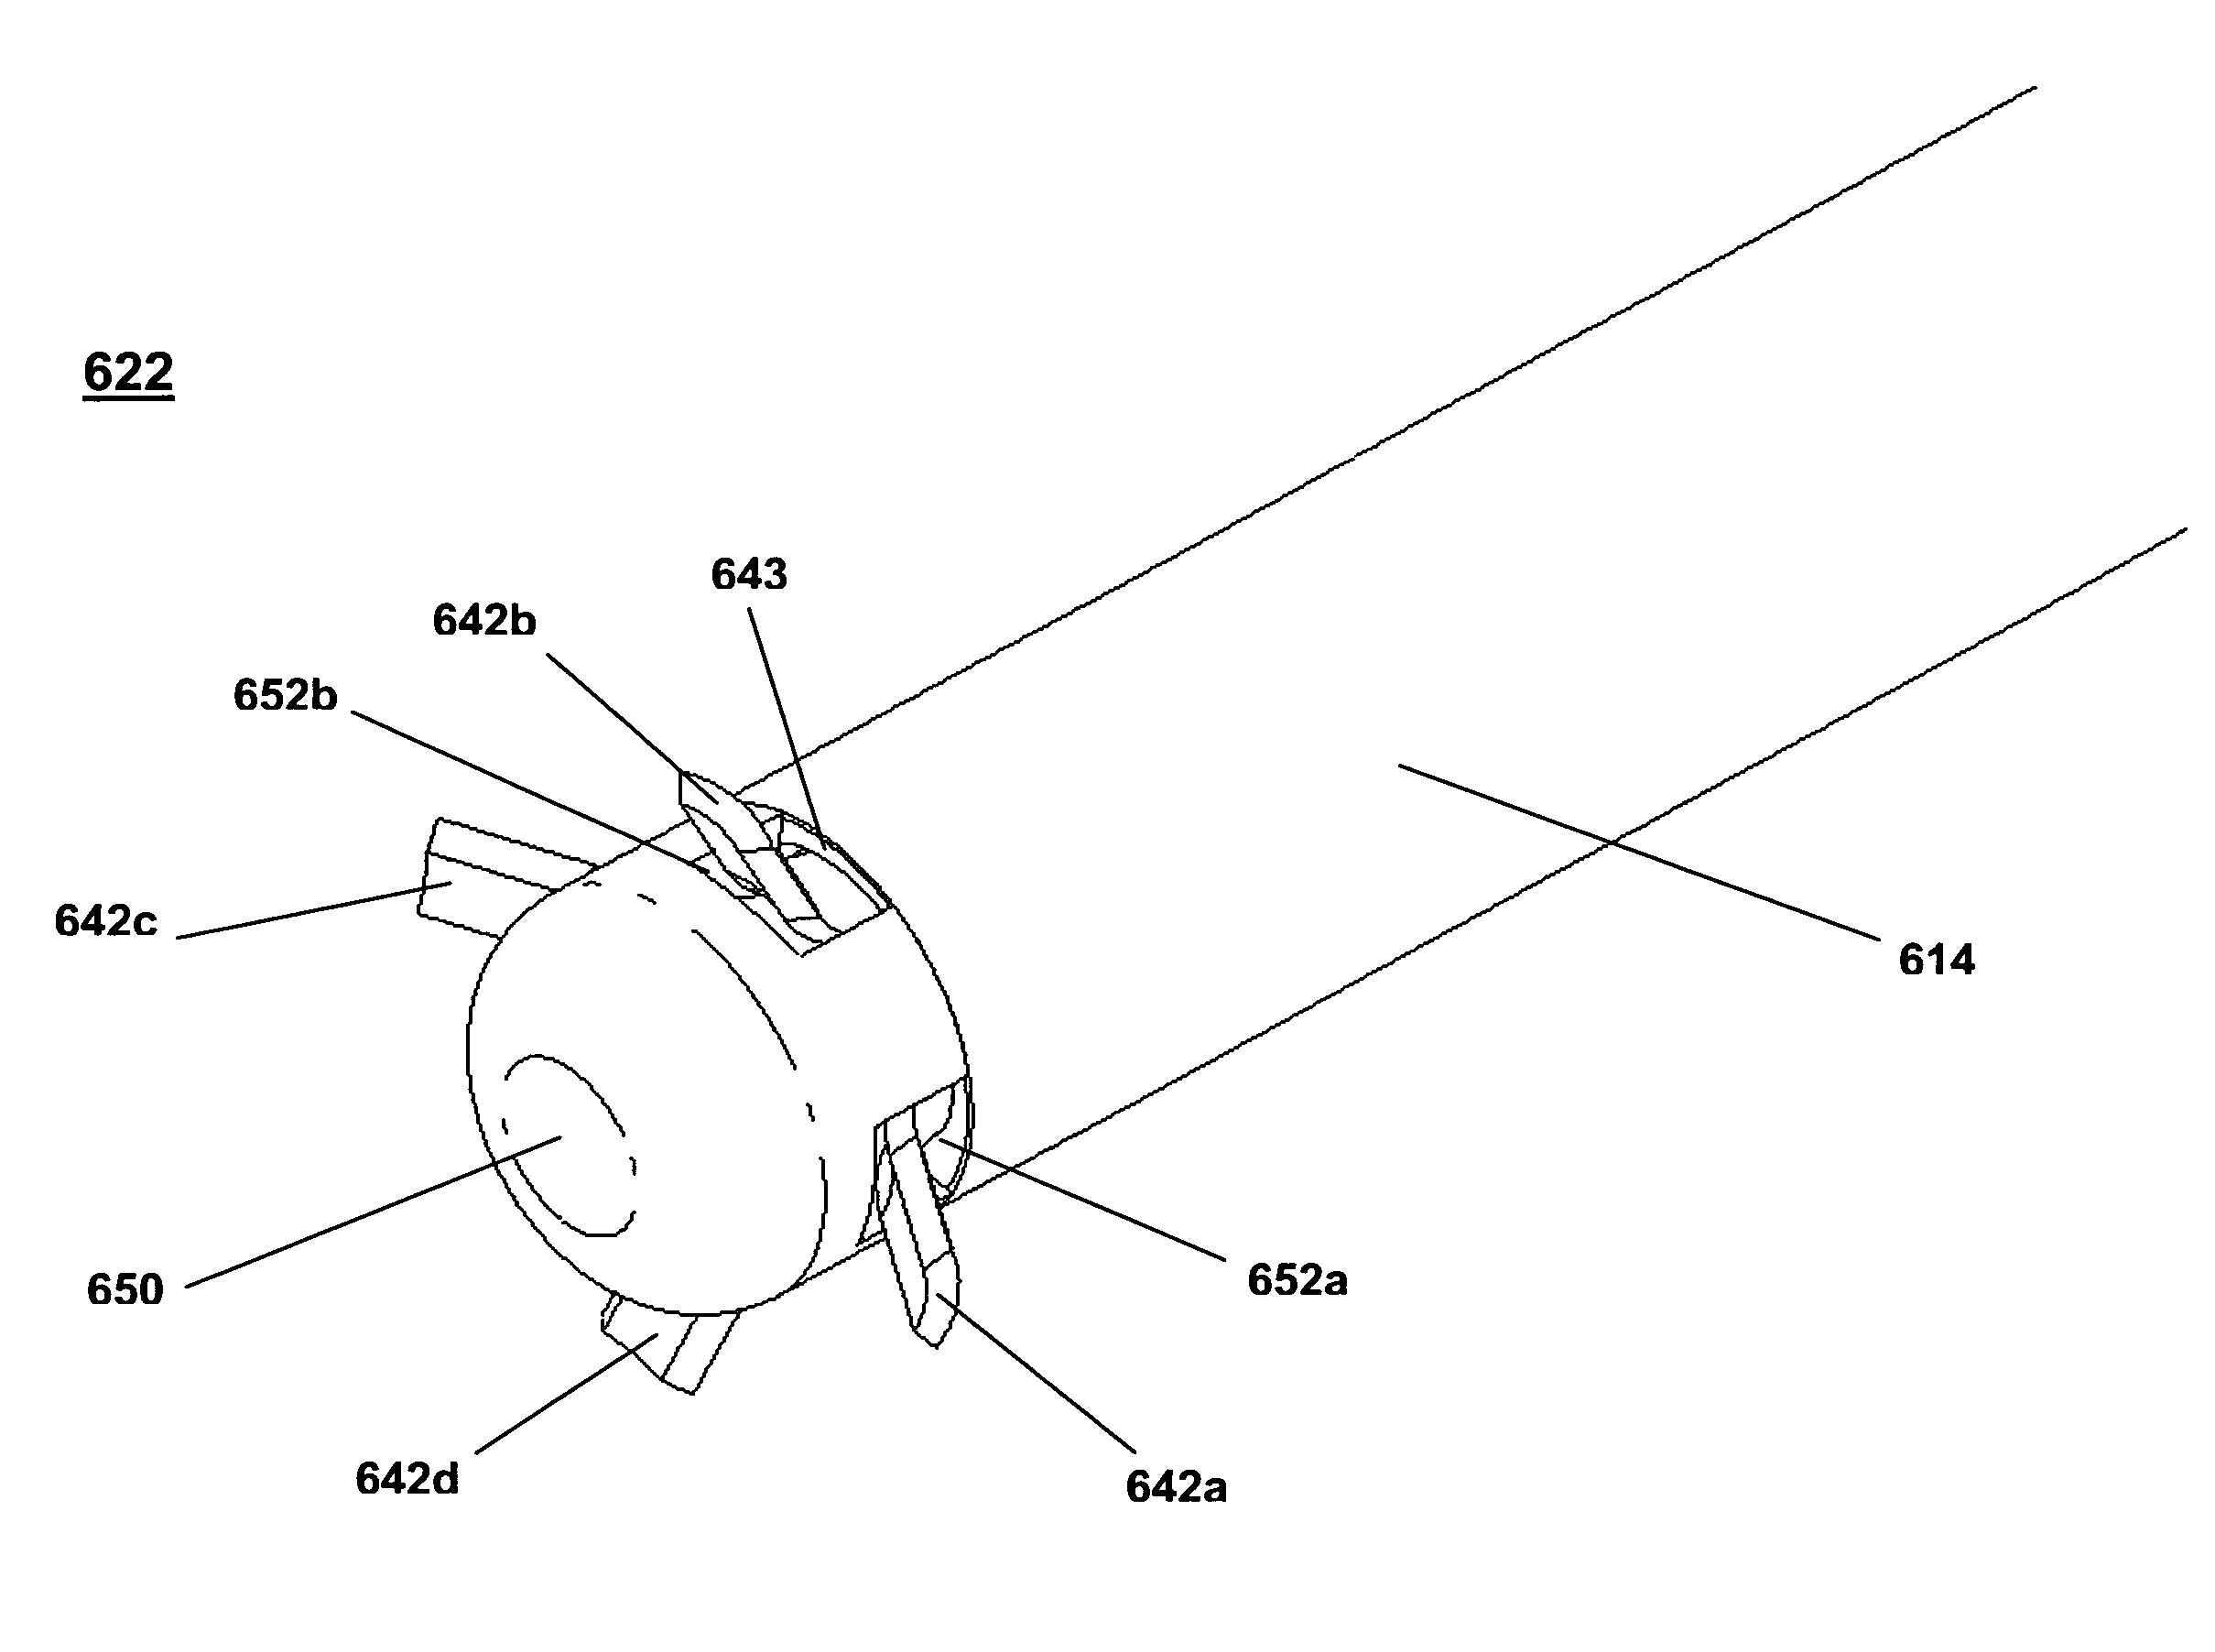 Cavity creation device and methods of use